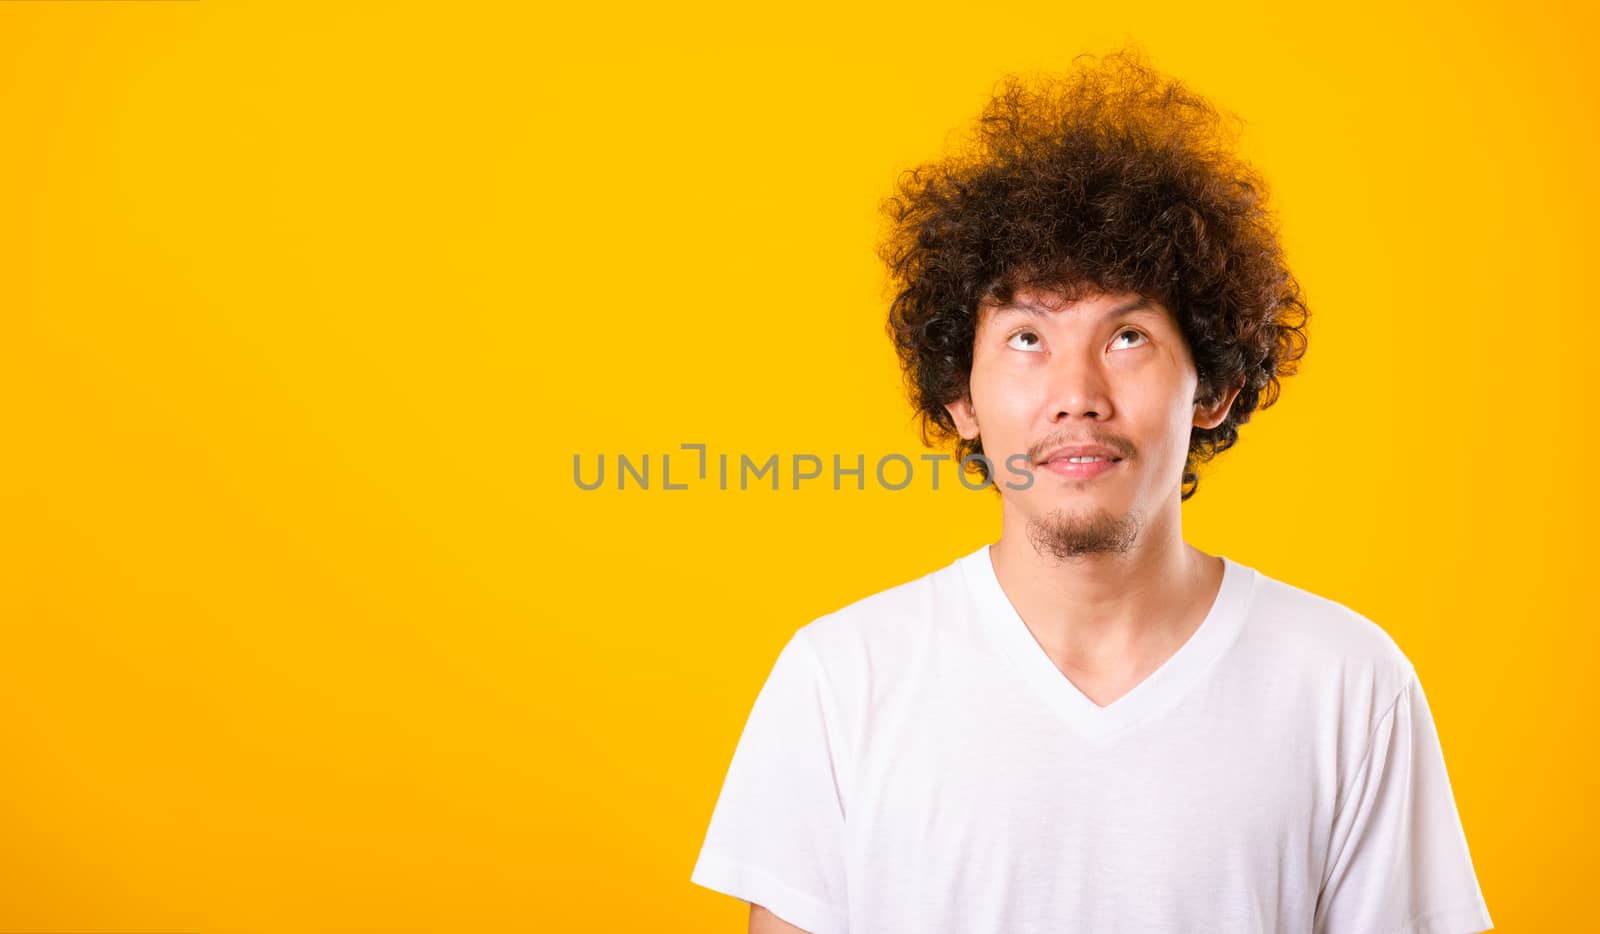 Asian handsome man with curly hair looking up see he hair isolat by Sorapop